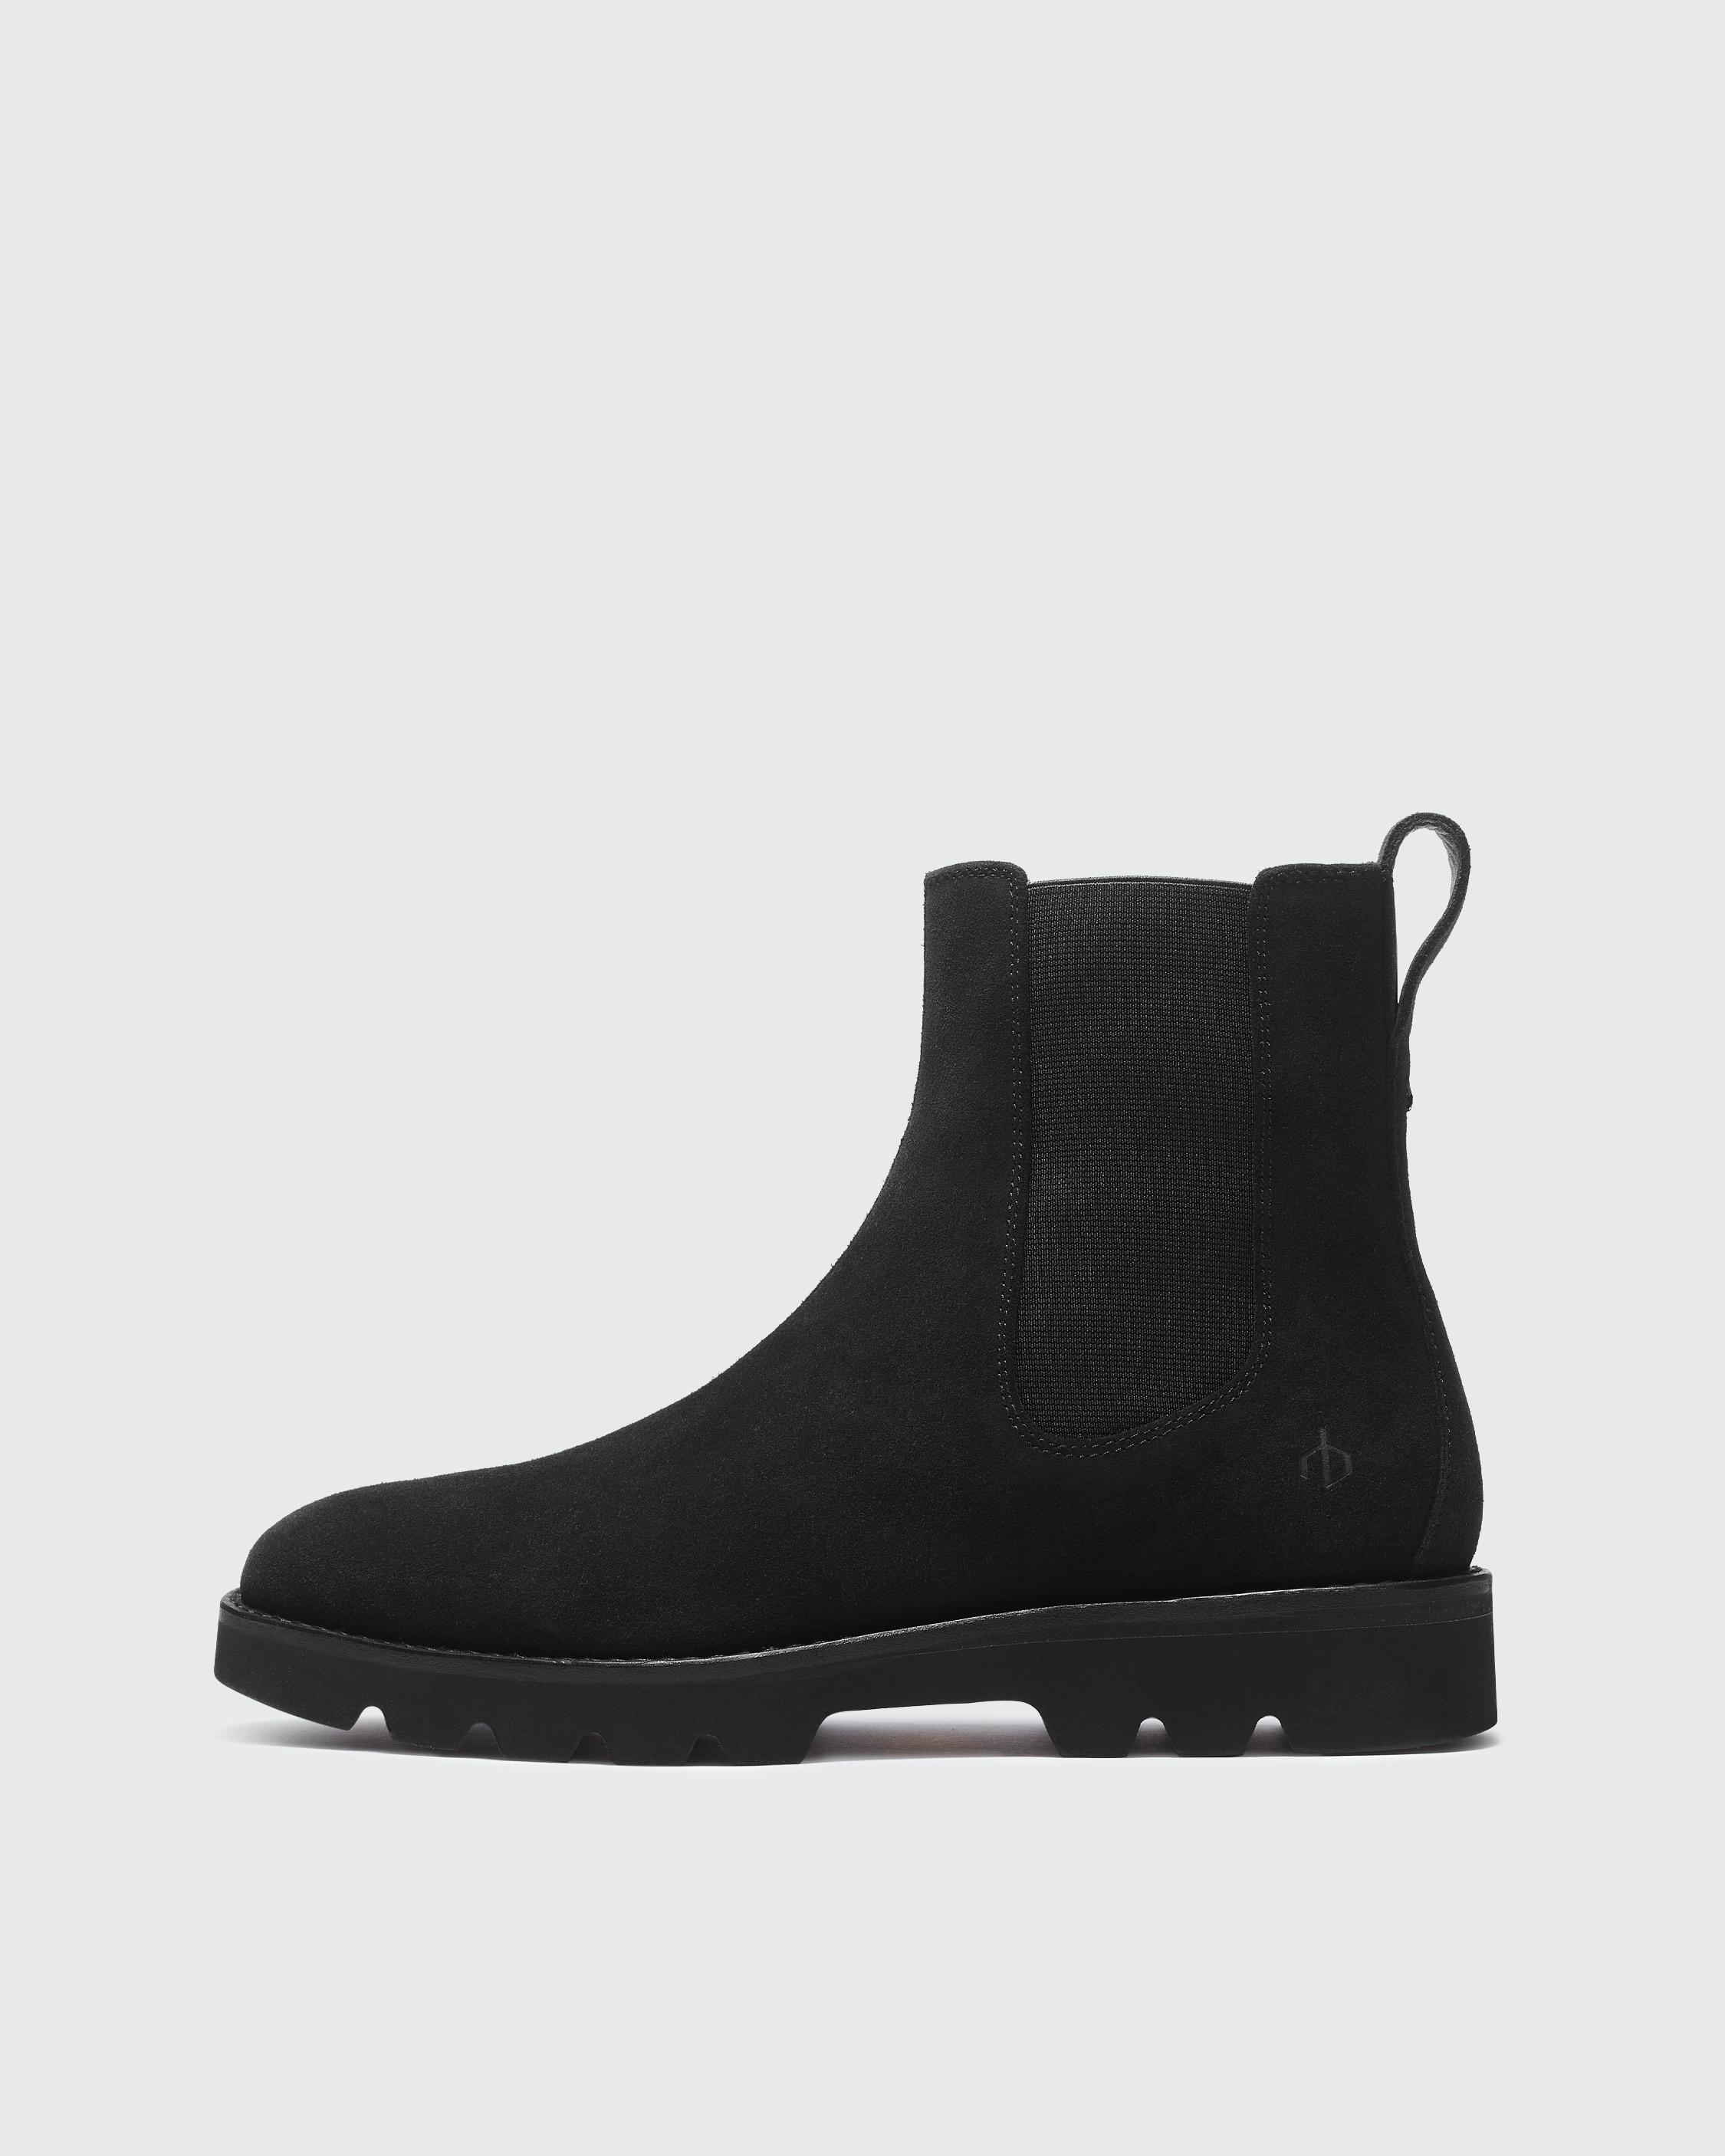 Bedford Chelsea Boot - Suede
Lug Ankle Boot - 1